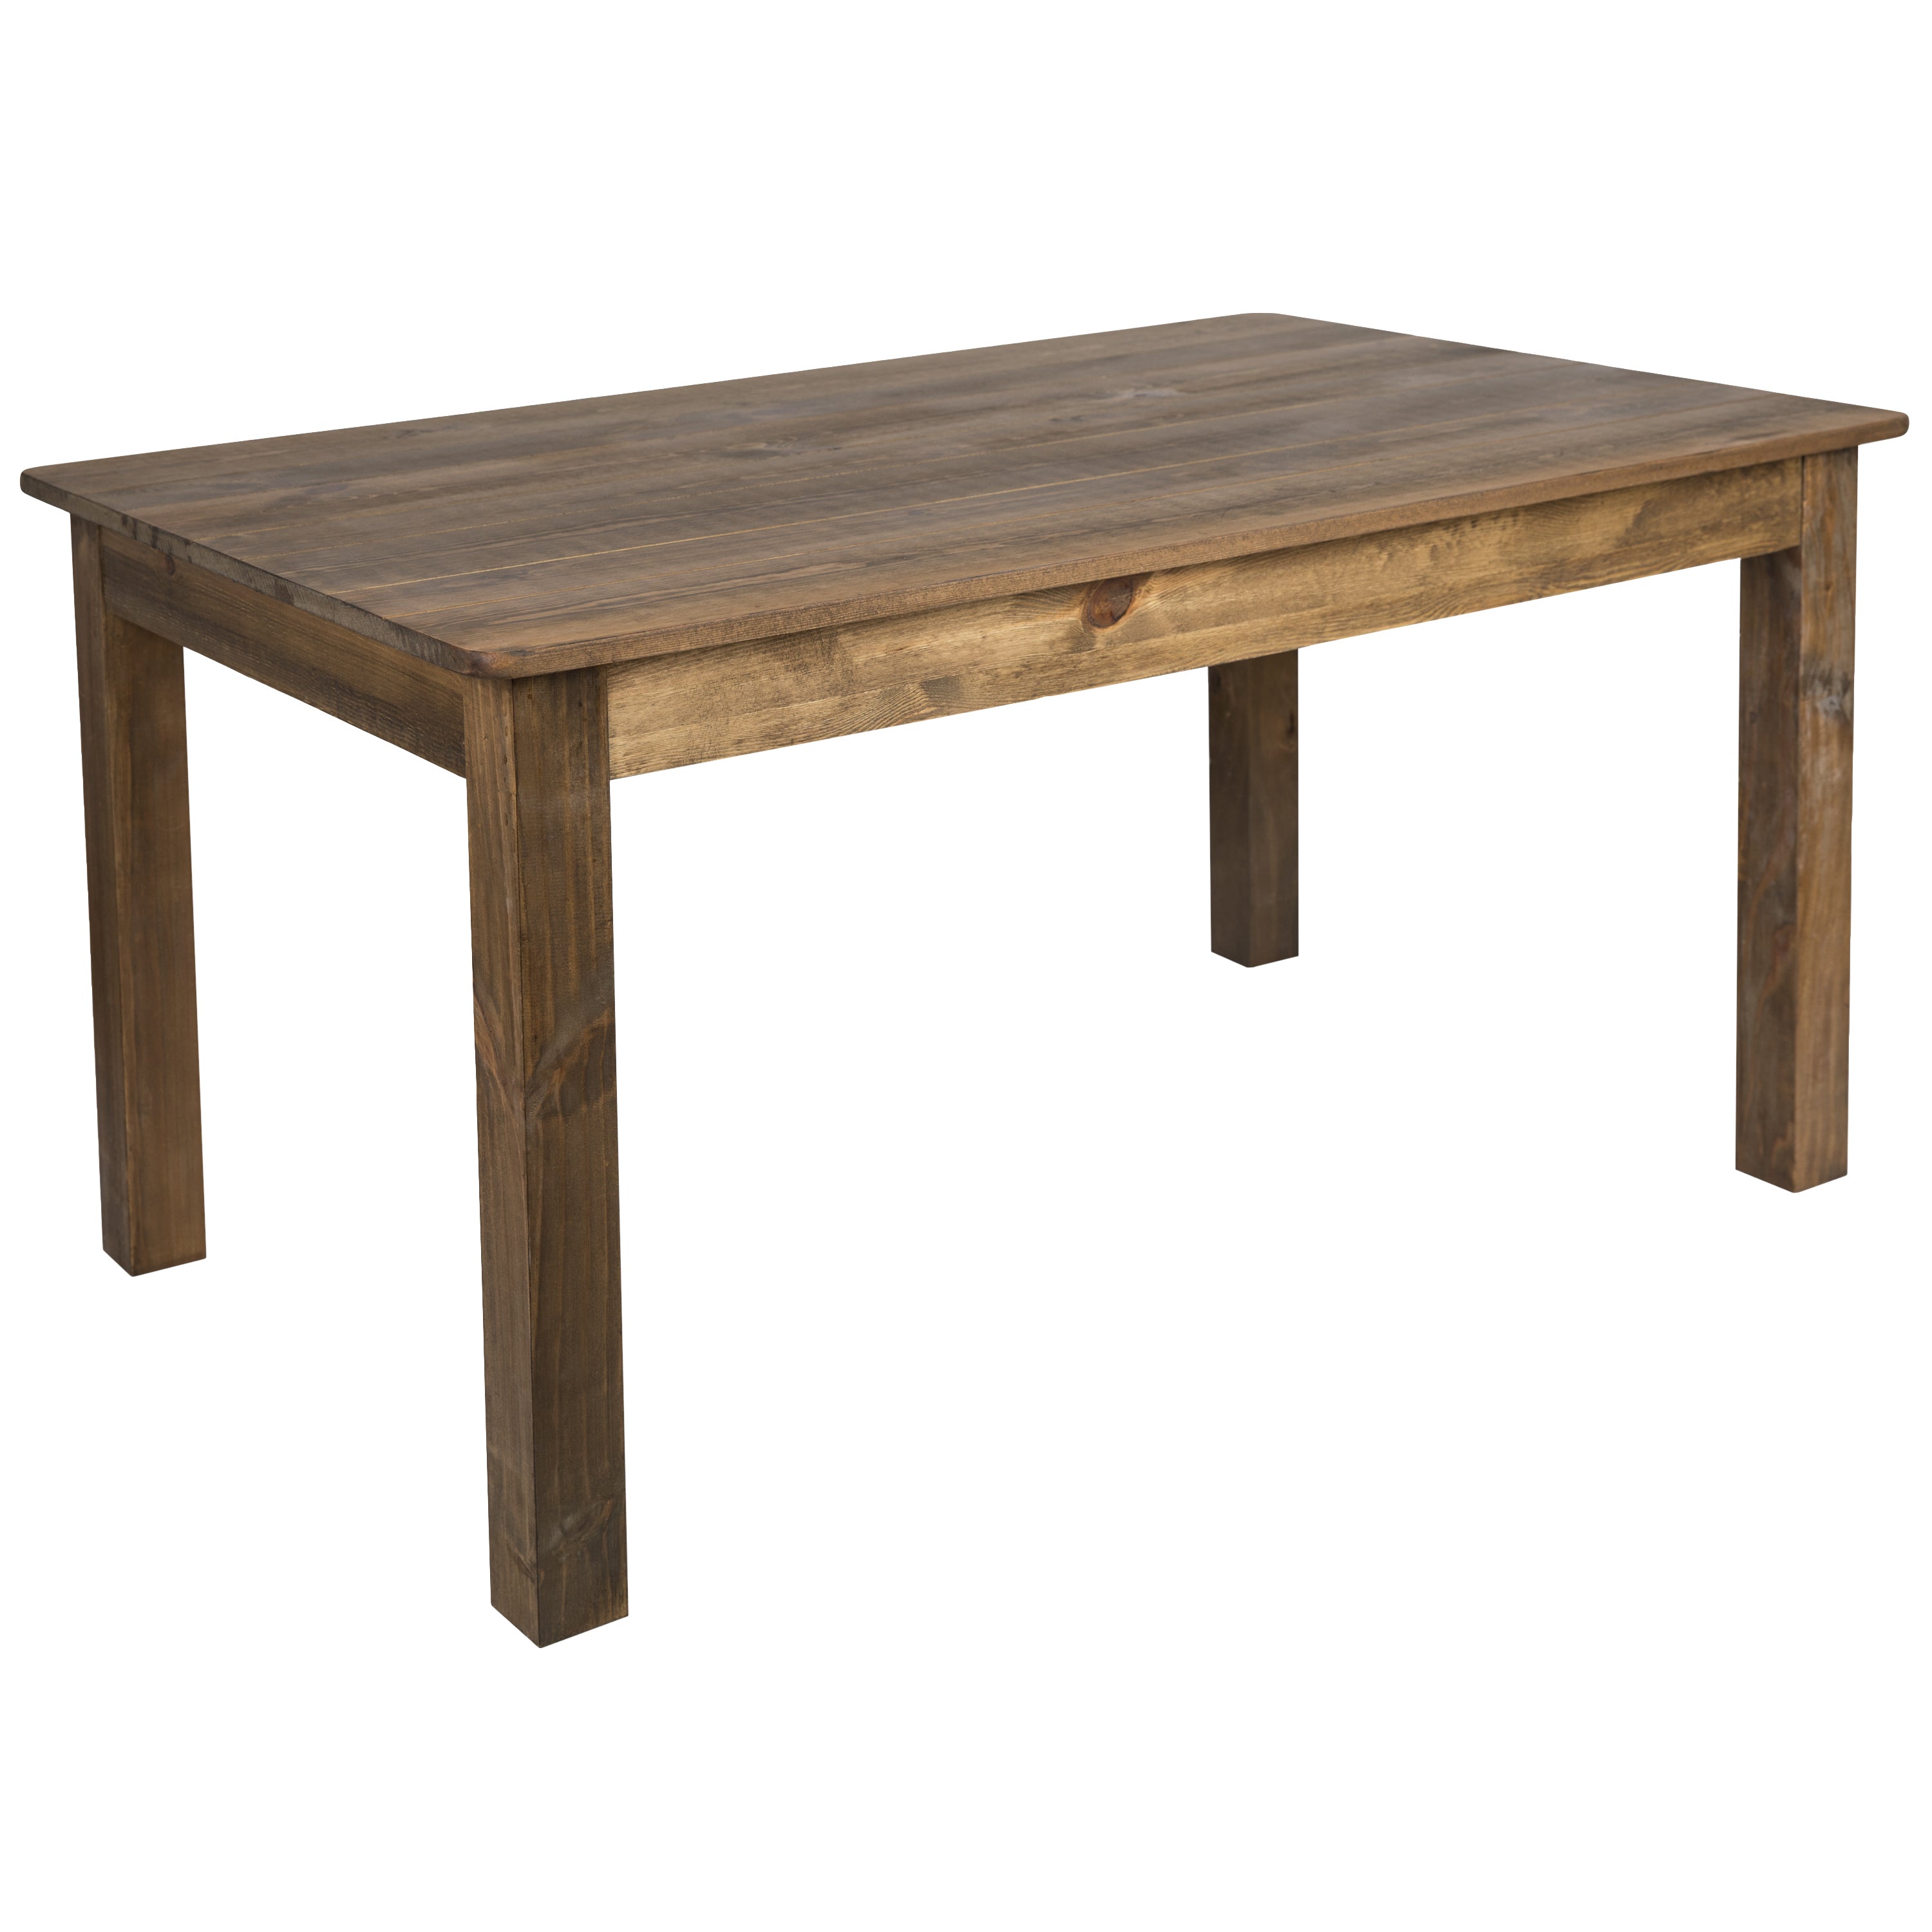 60" x 38" Rectangular Solid Pine Farm Dining Table-Dining Table-Flash Furniture-Wall2Wall Furnishings